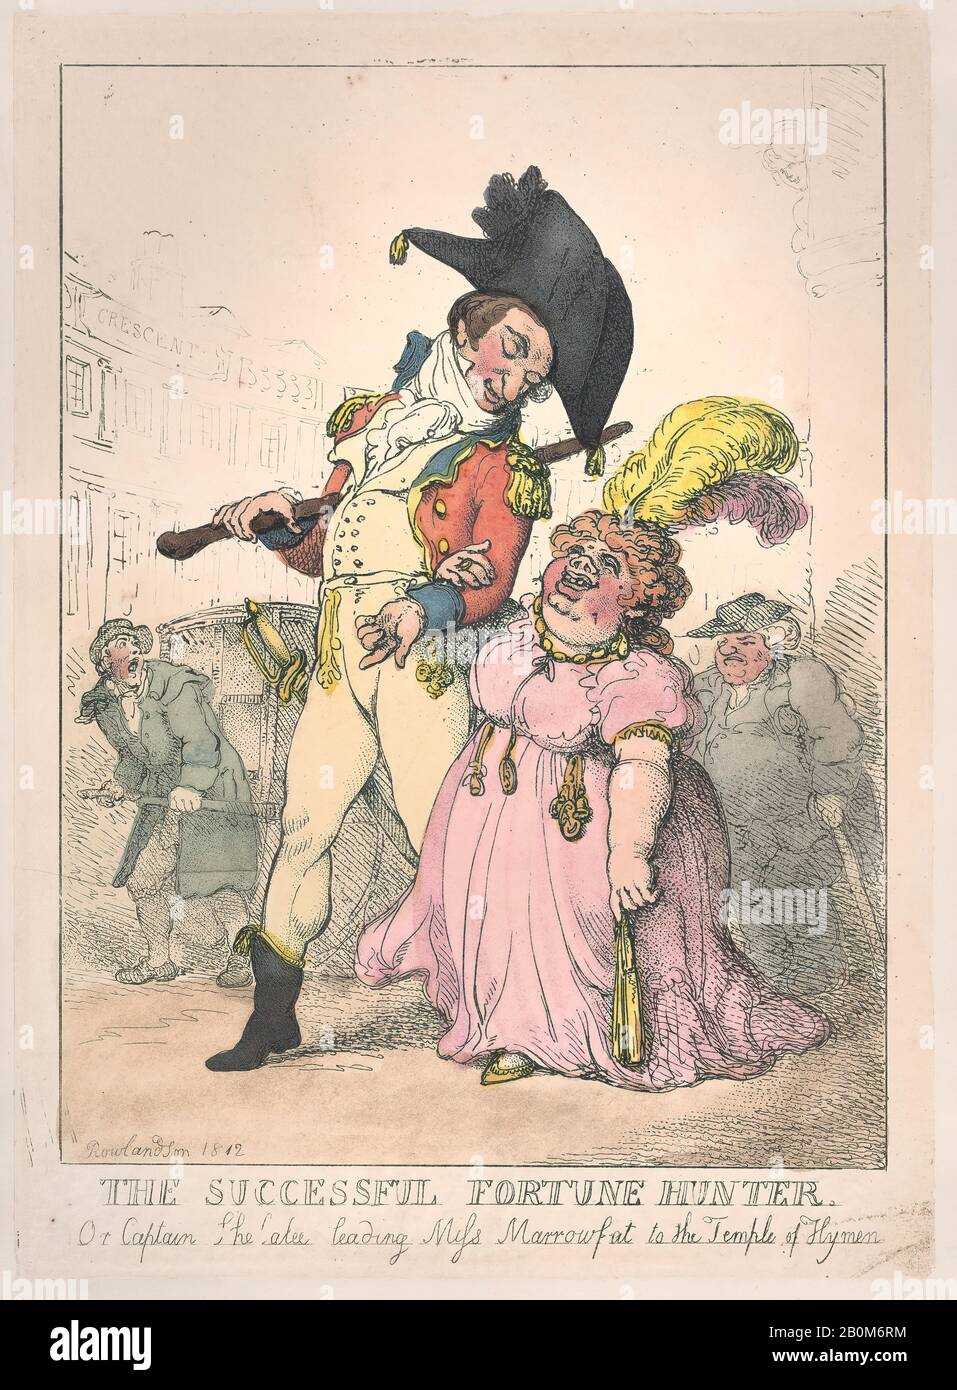 Thomas Rowlandson, The Successful Fortune Hunter, or Captain Shelalee Leading Miss Marrowfat to the Temple of Hymen, Thomas Rowlandson (British, London 1757–1827 London), [1802], reissued 1812, Hand-colored etching, Sheet: 13 7/16 × 9 3/4 in. (34.1 × 24.8 cm), Prints Stock Photo